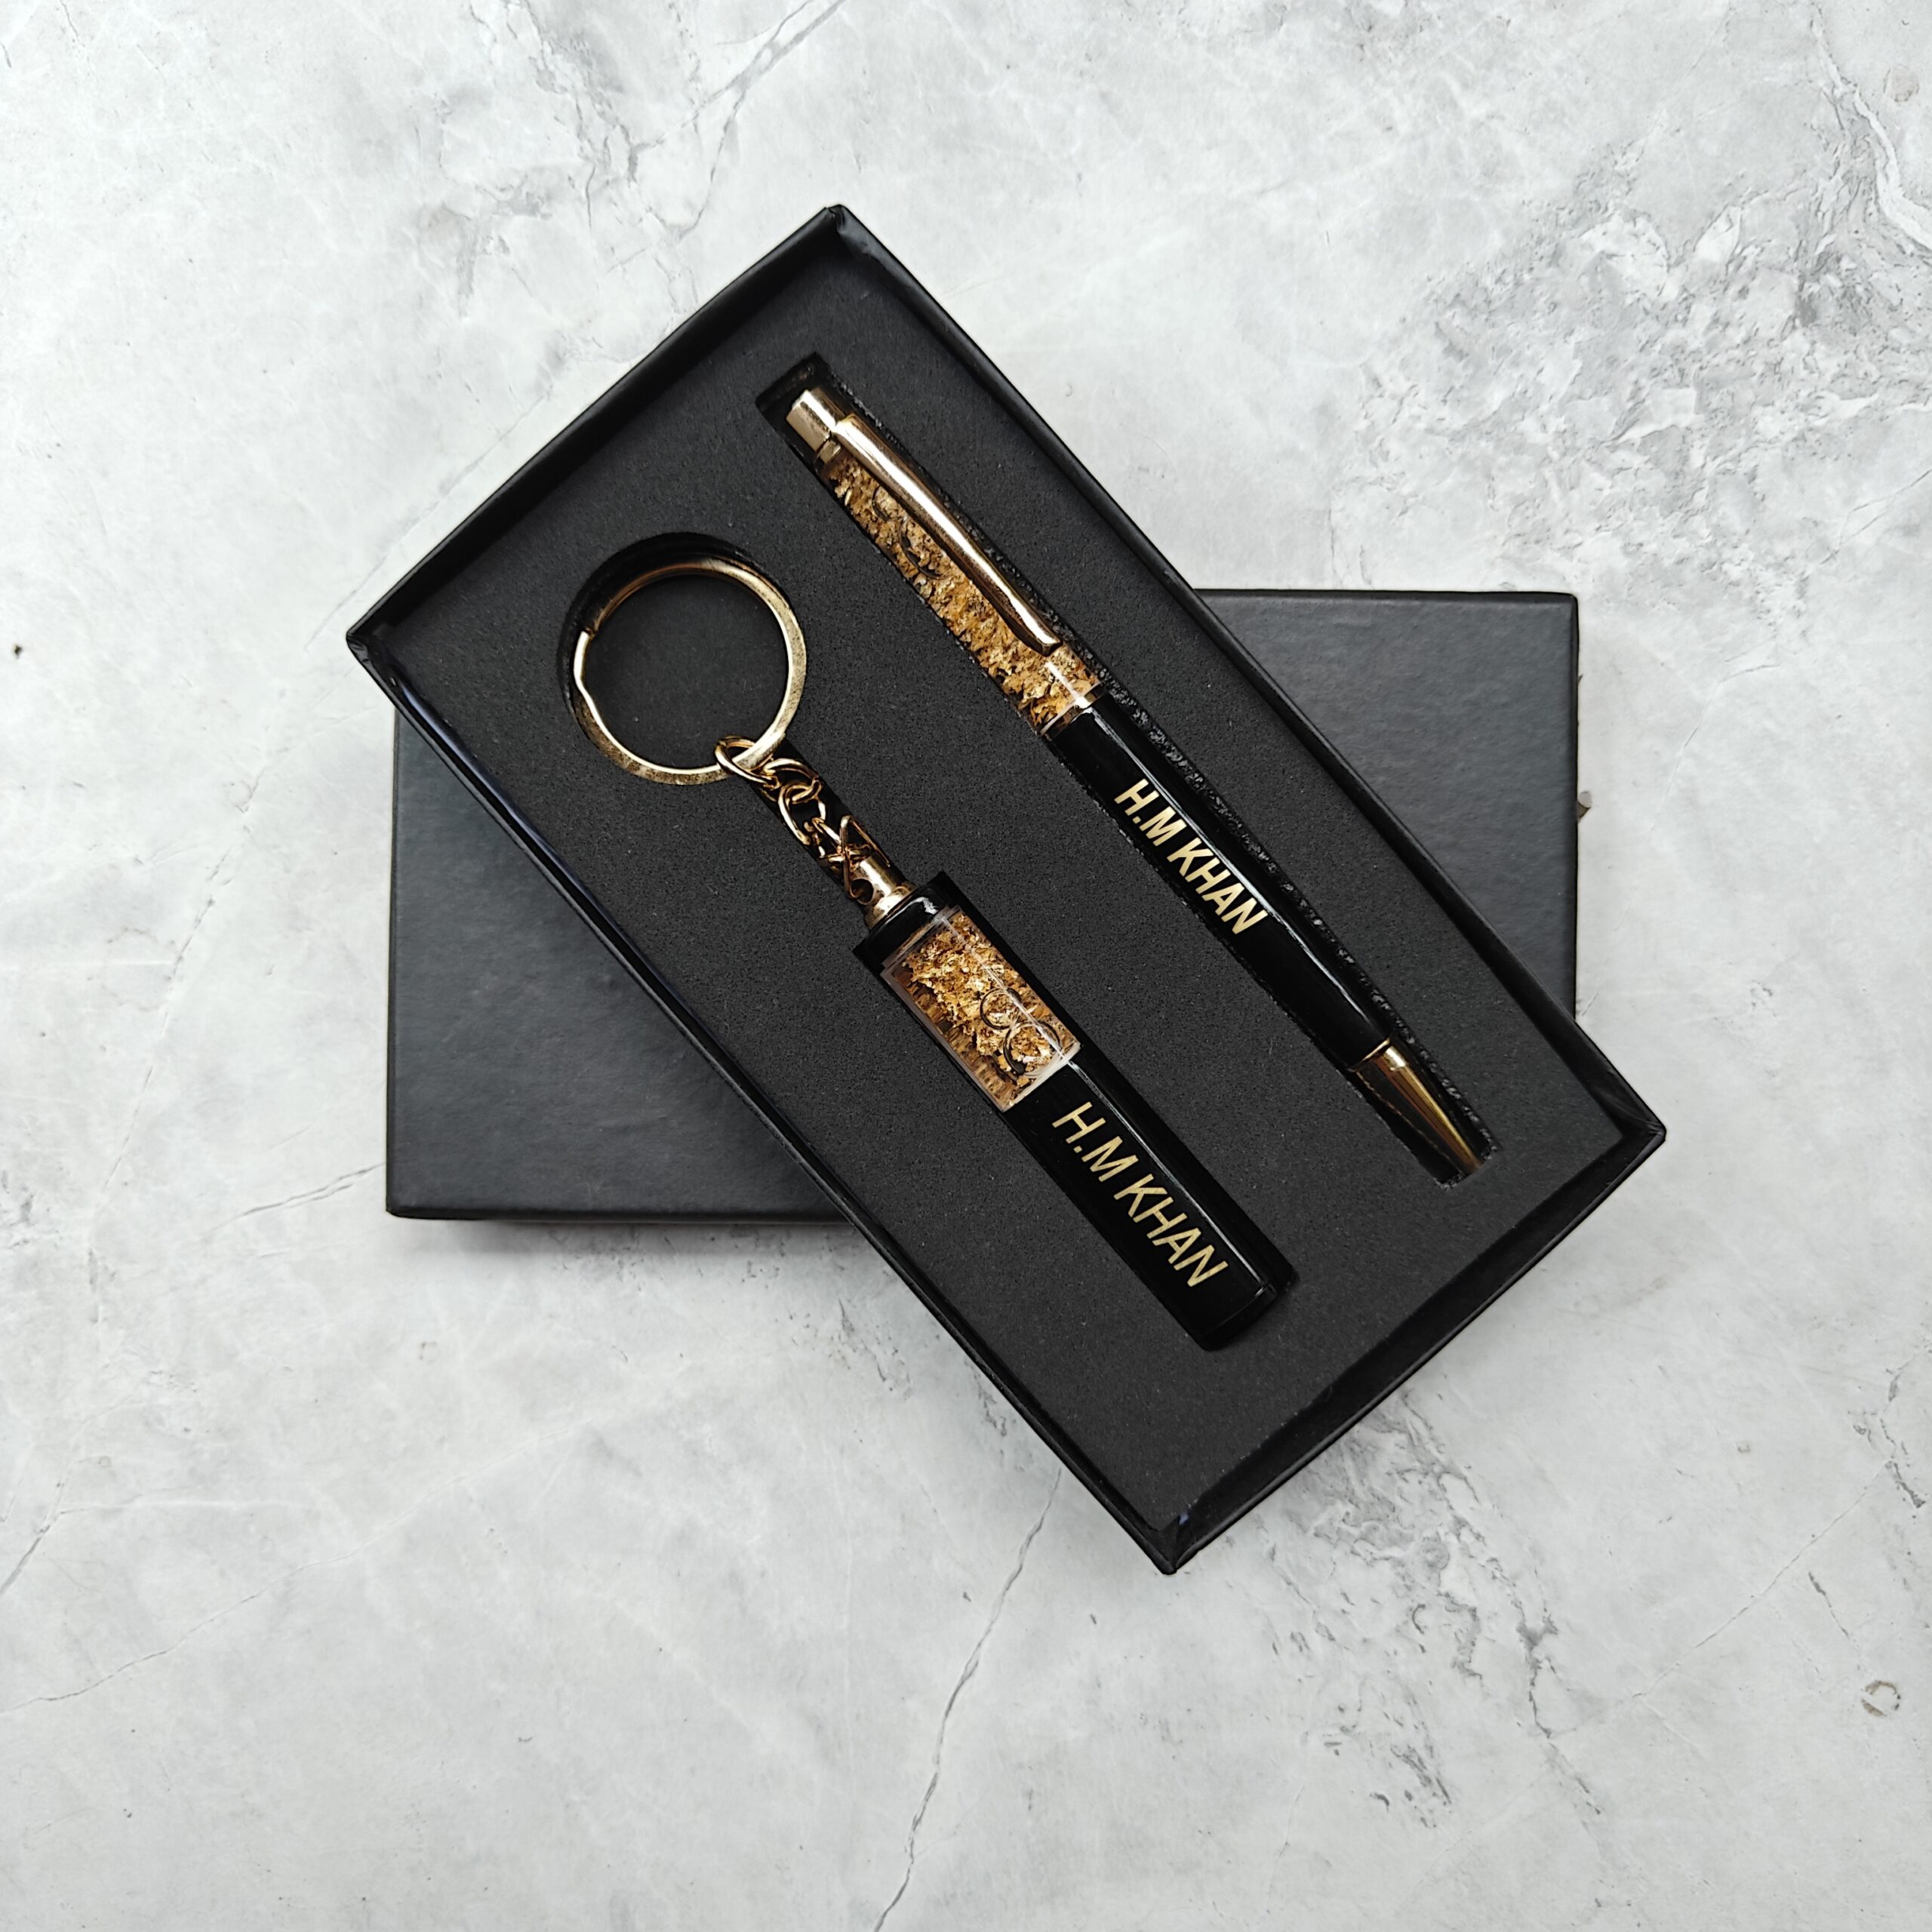 Personalized Pen and Keychain Set in Black and Golden Flake